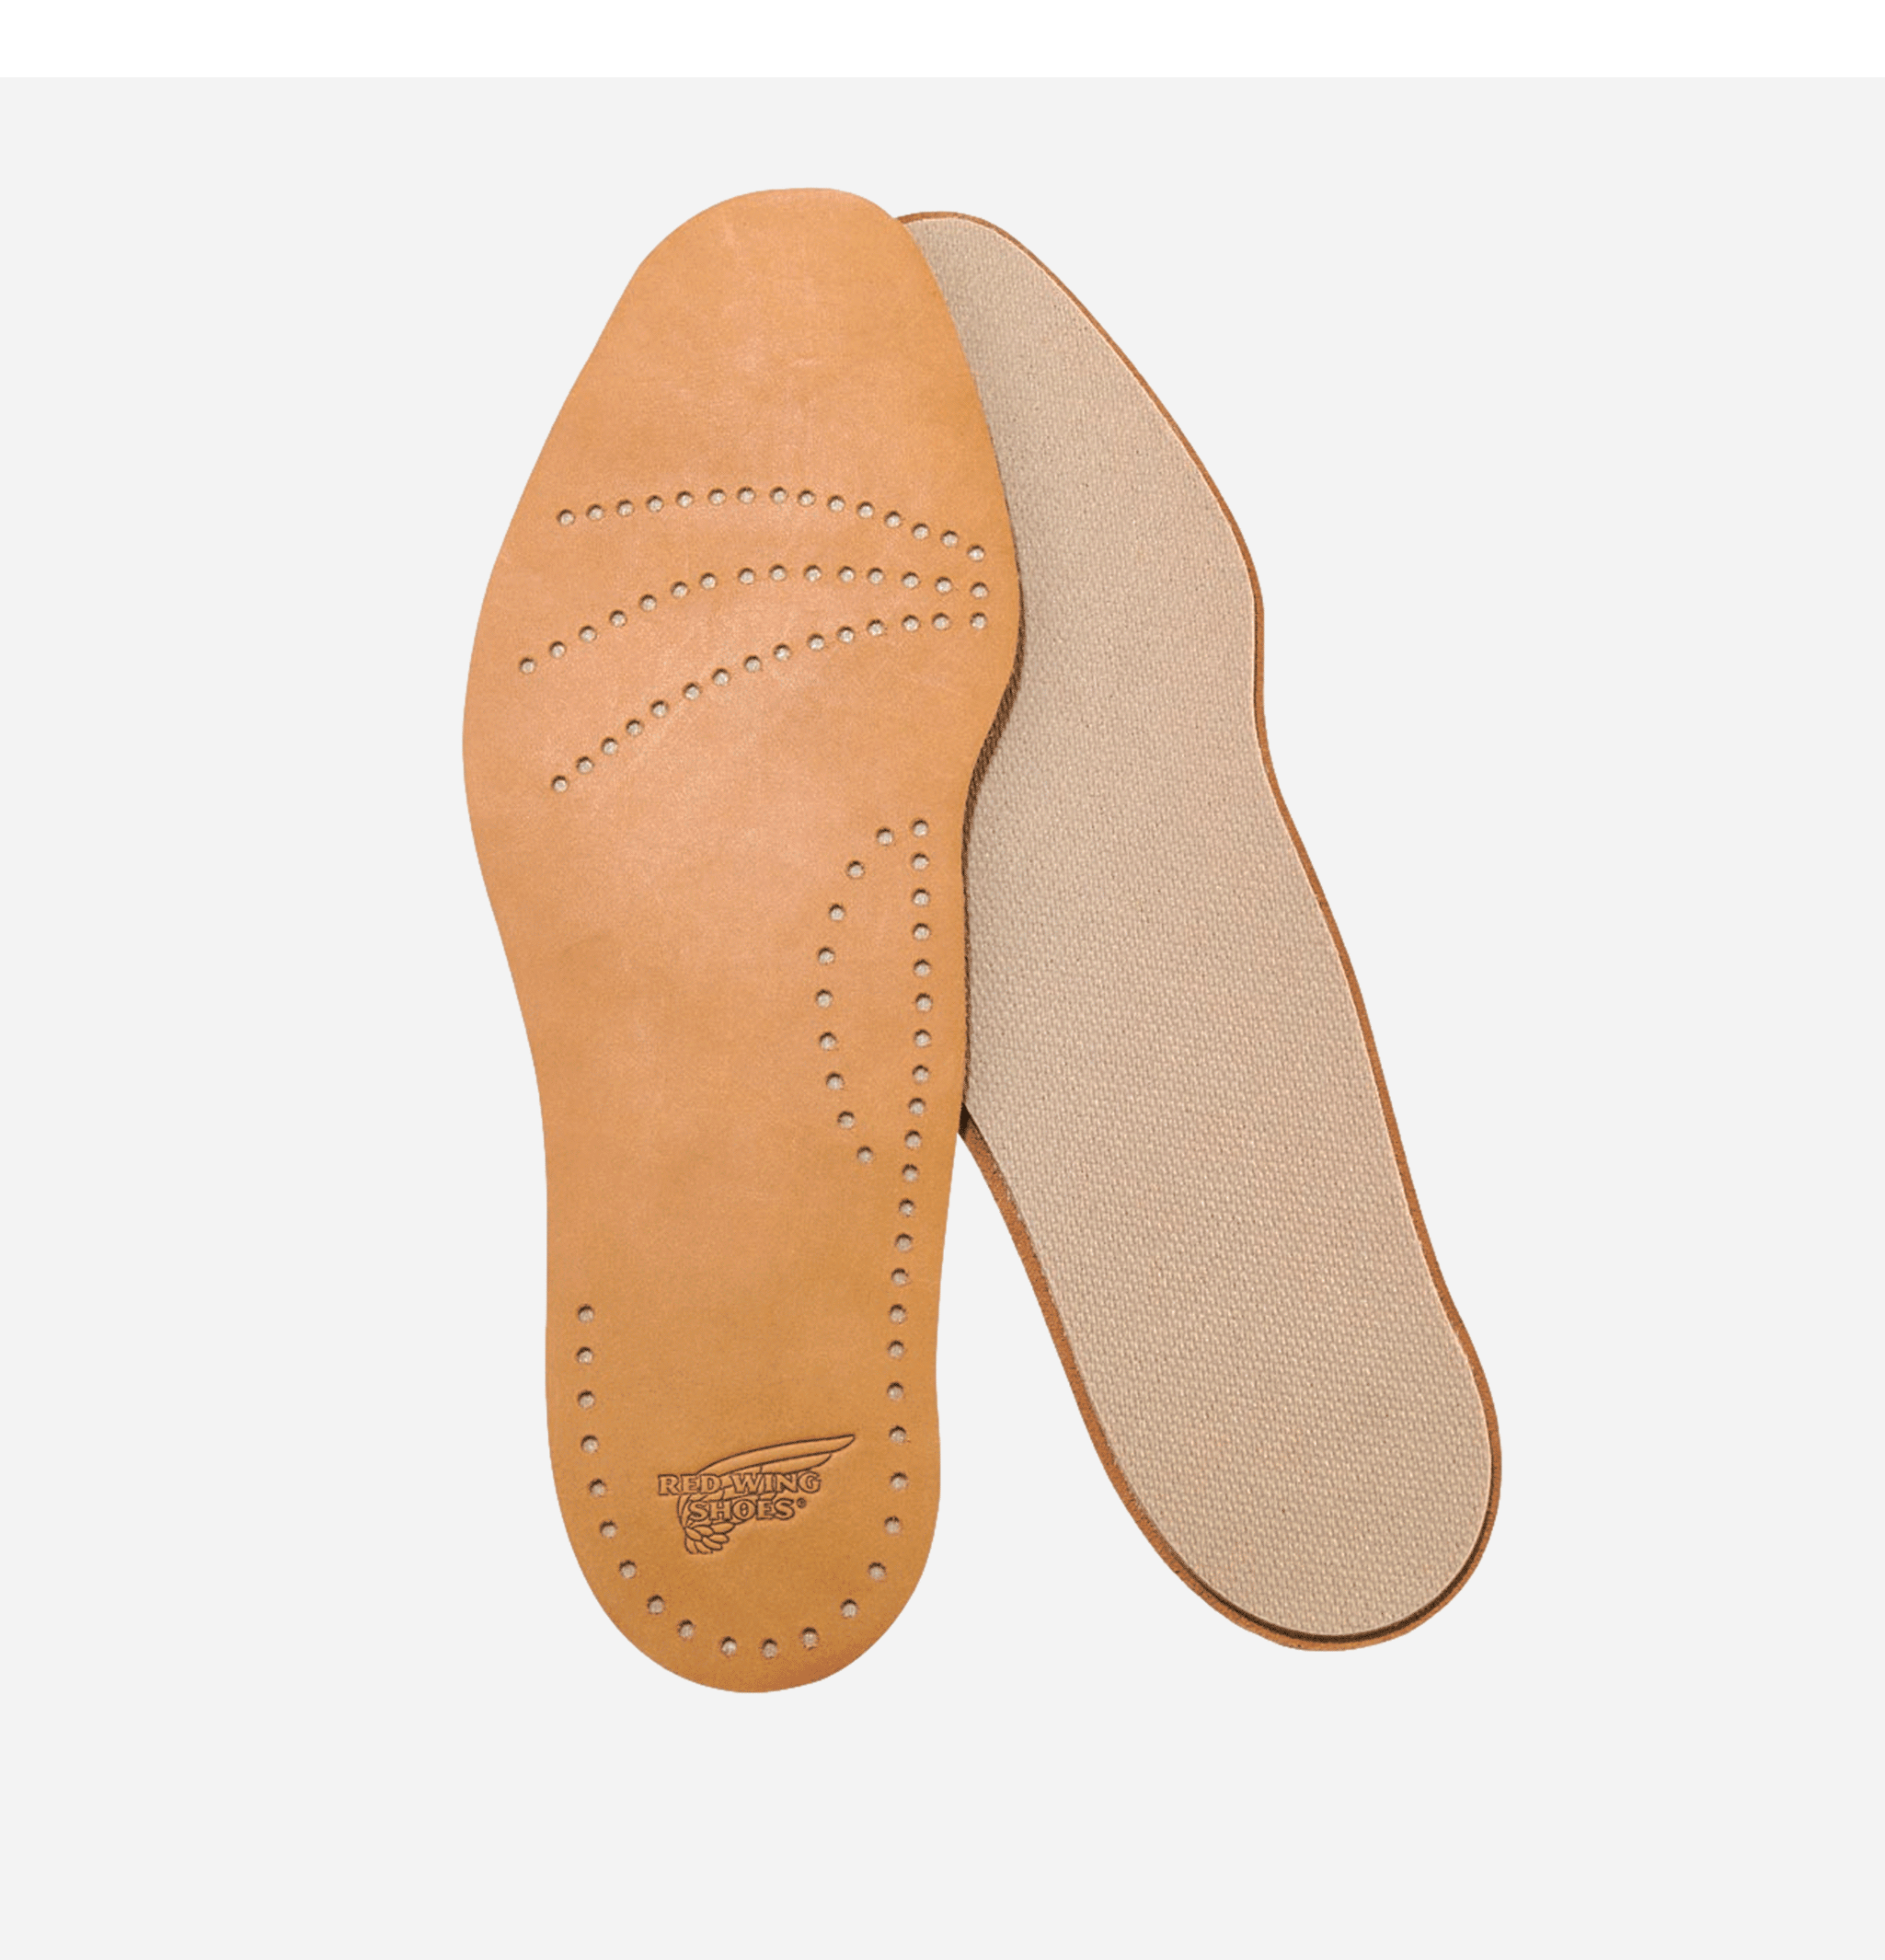 96356 - Leather Insole Comfort